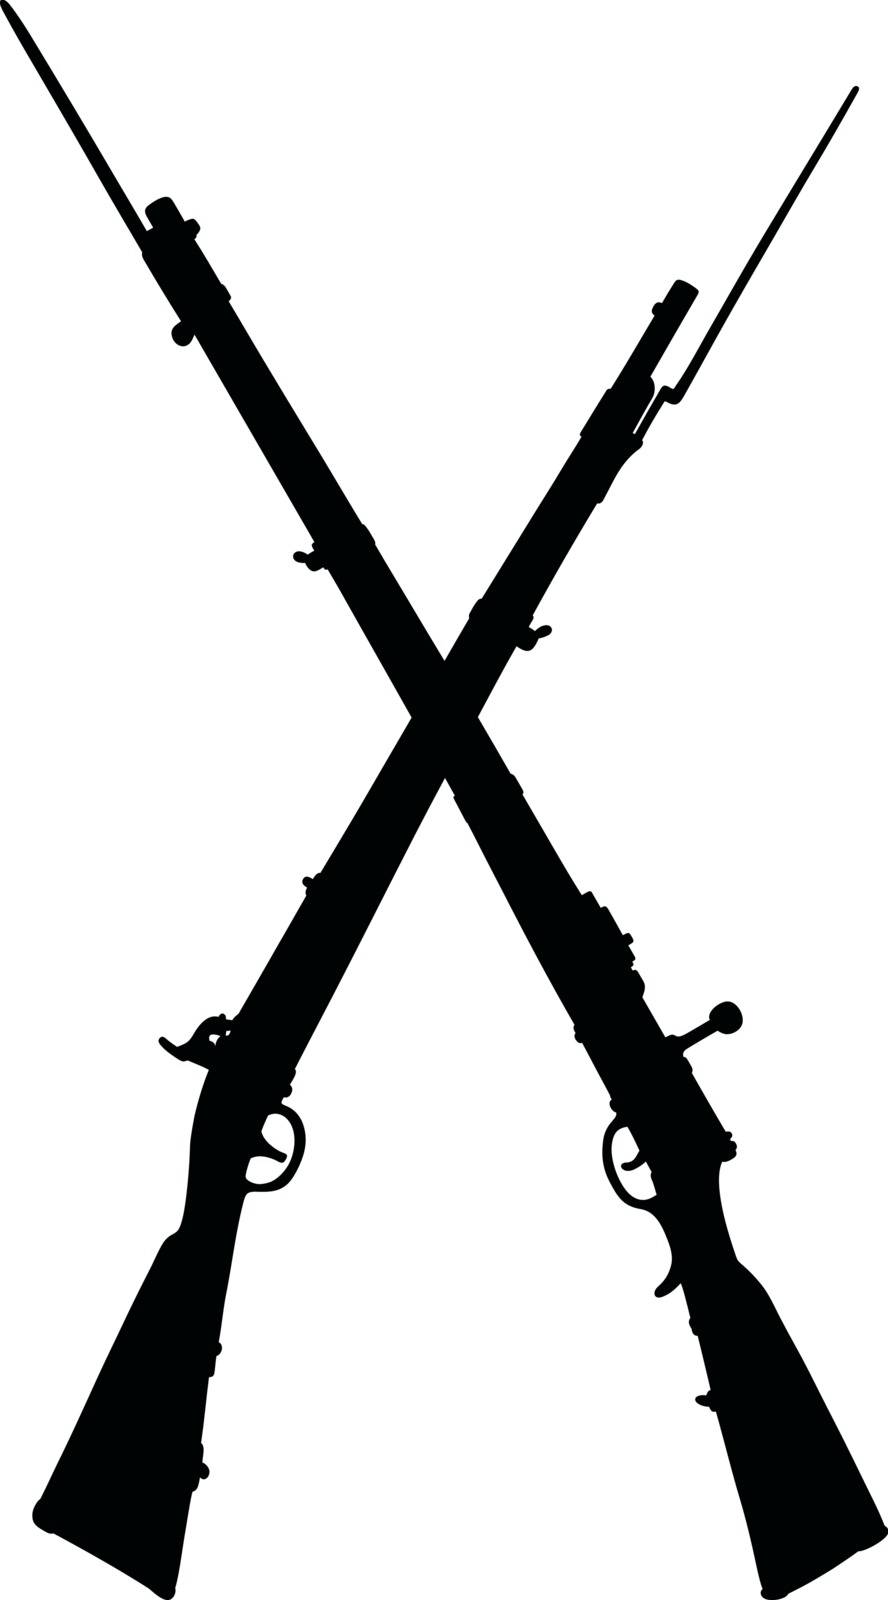 Hand drawing of two black silhouettes of historical military flintlocks